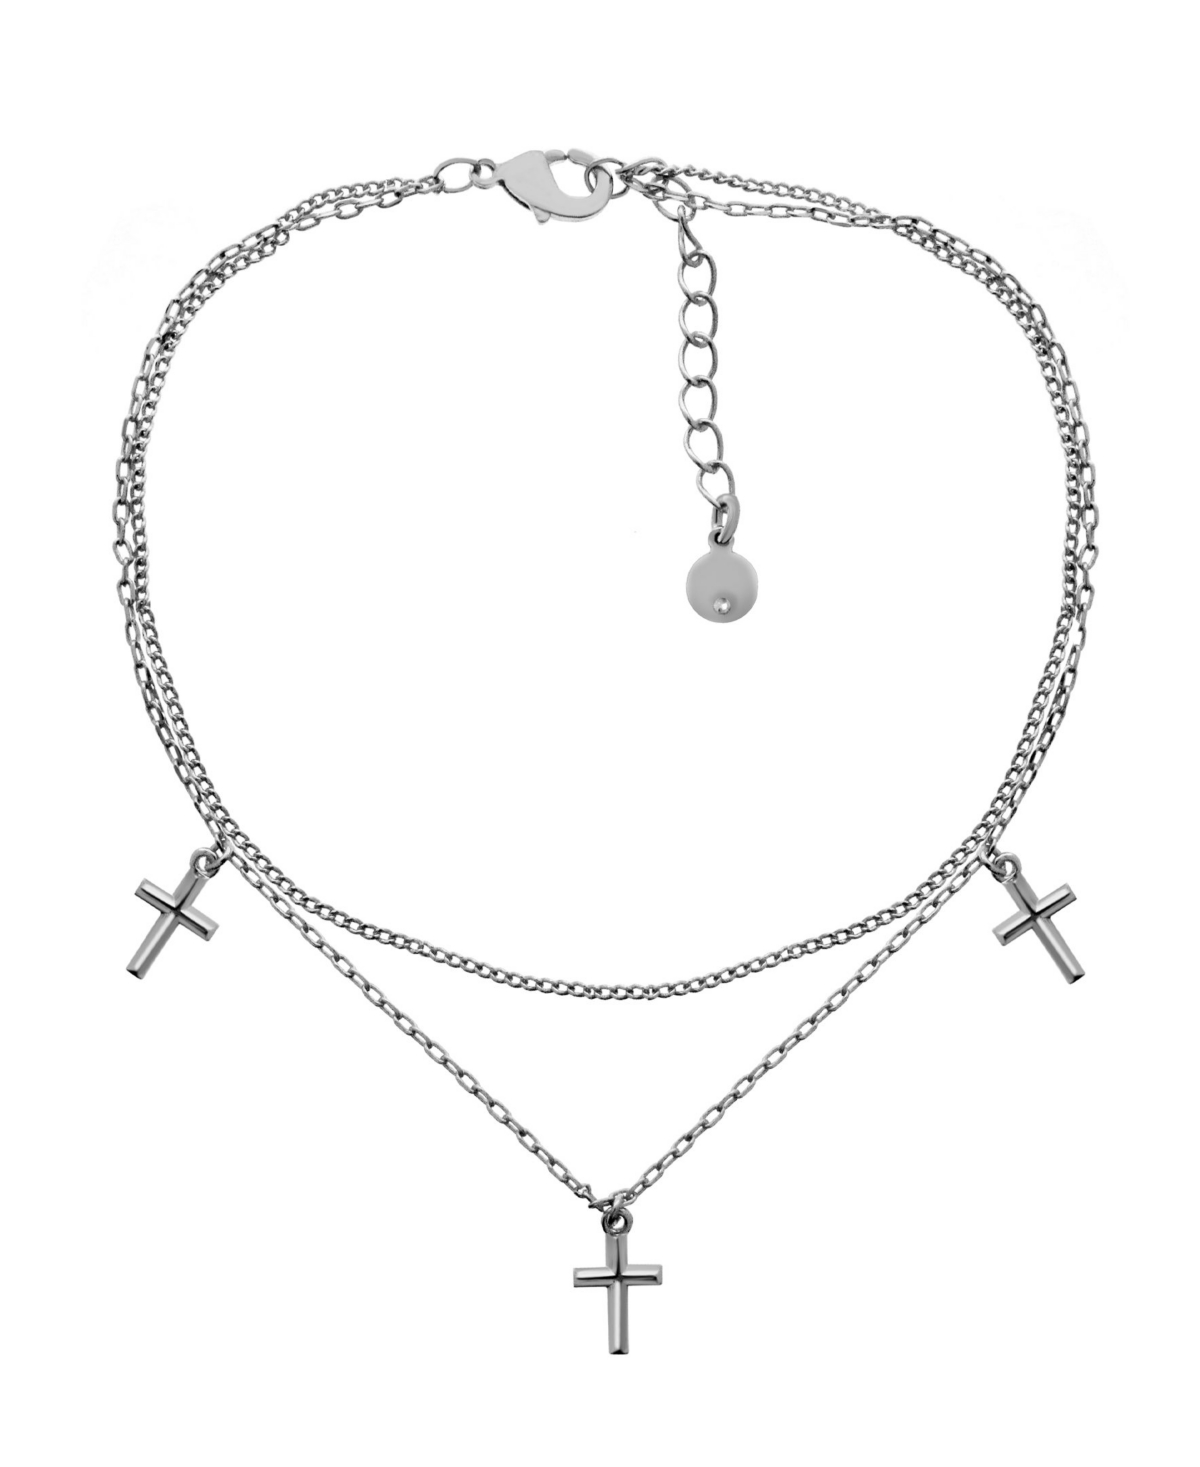 Cross Charm Double Chain Anklet in Silver Plate - Silver